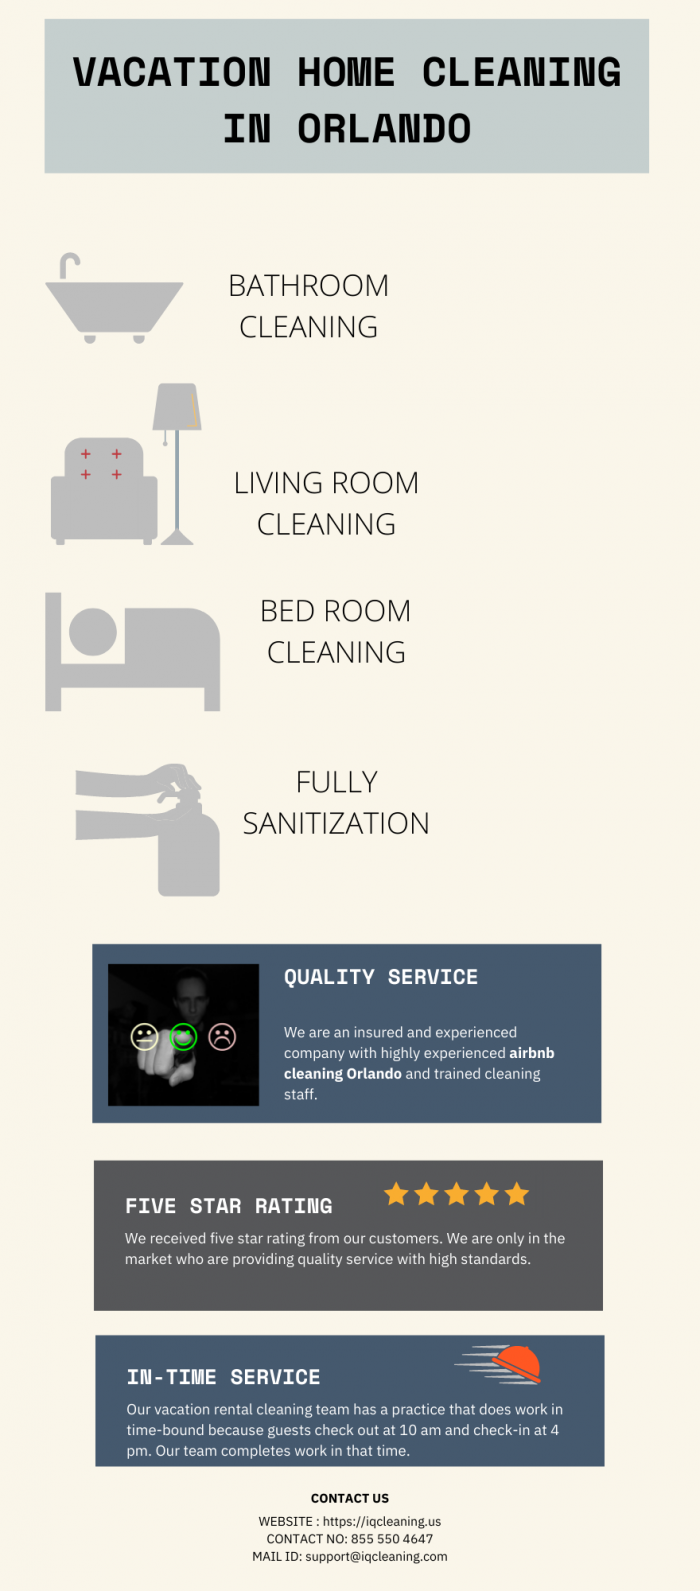 Get the Most Affordable Vacation Cleaning Service in Orlando